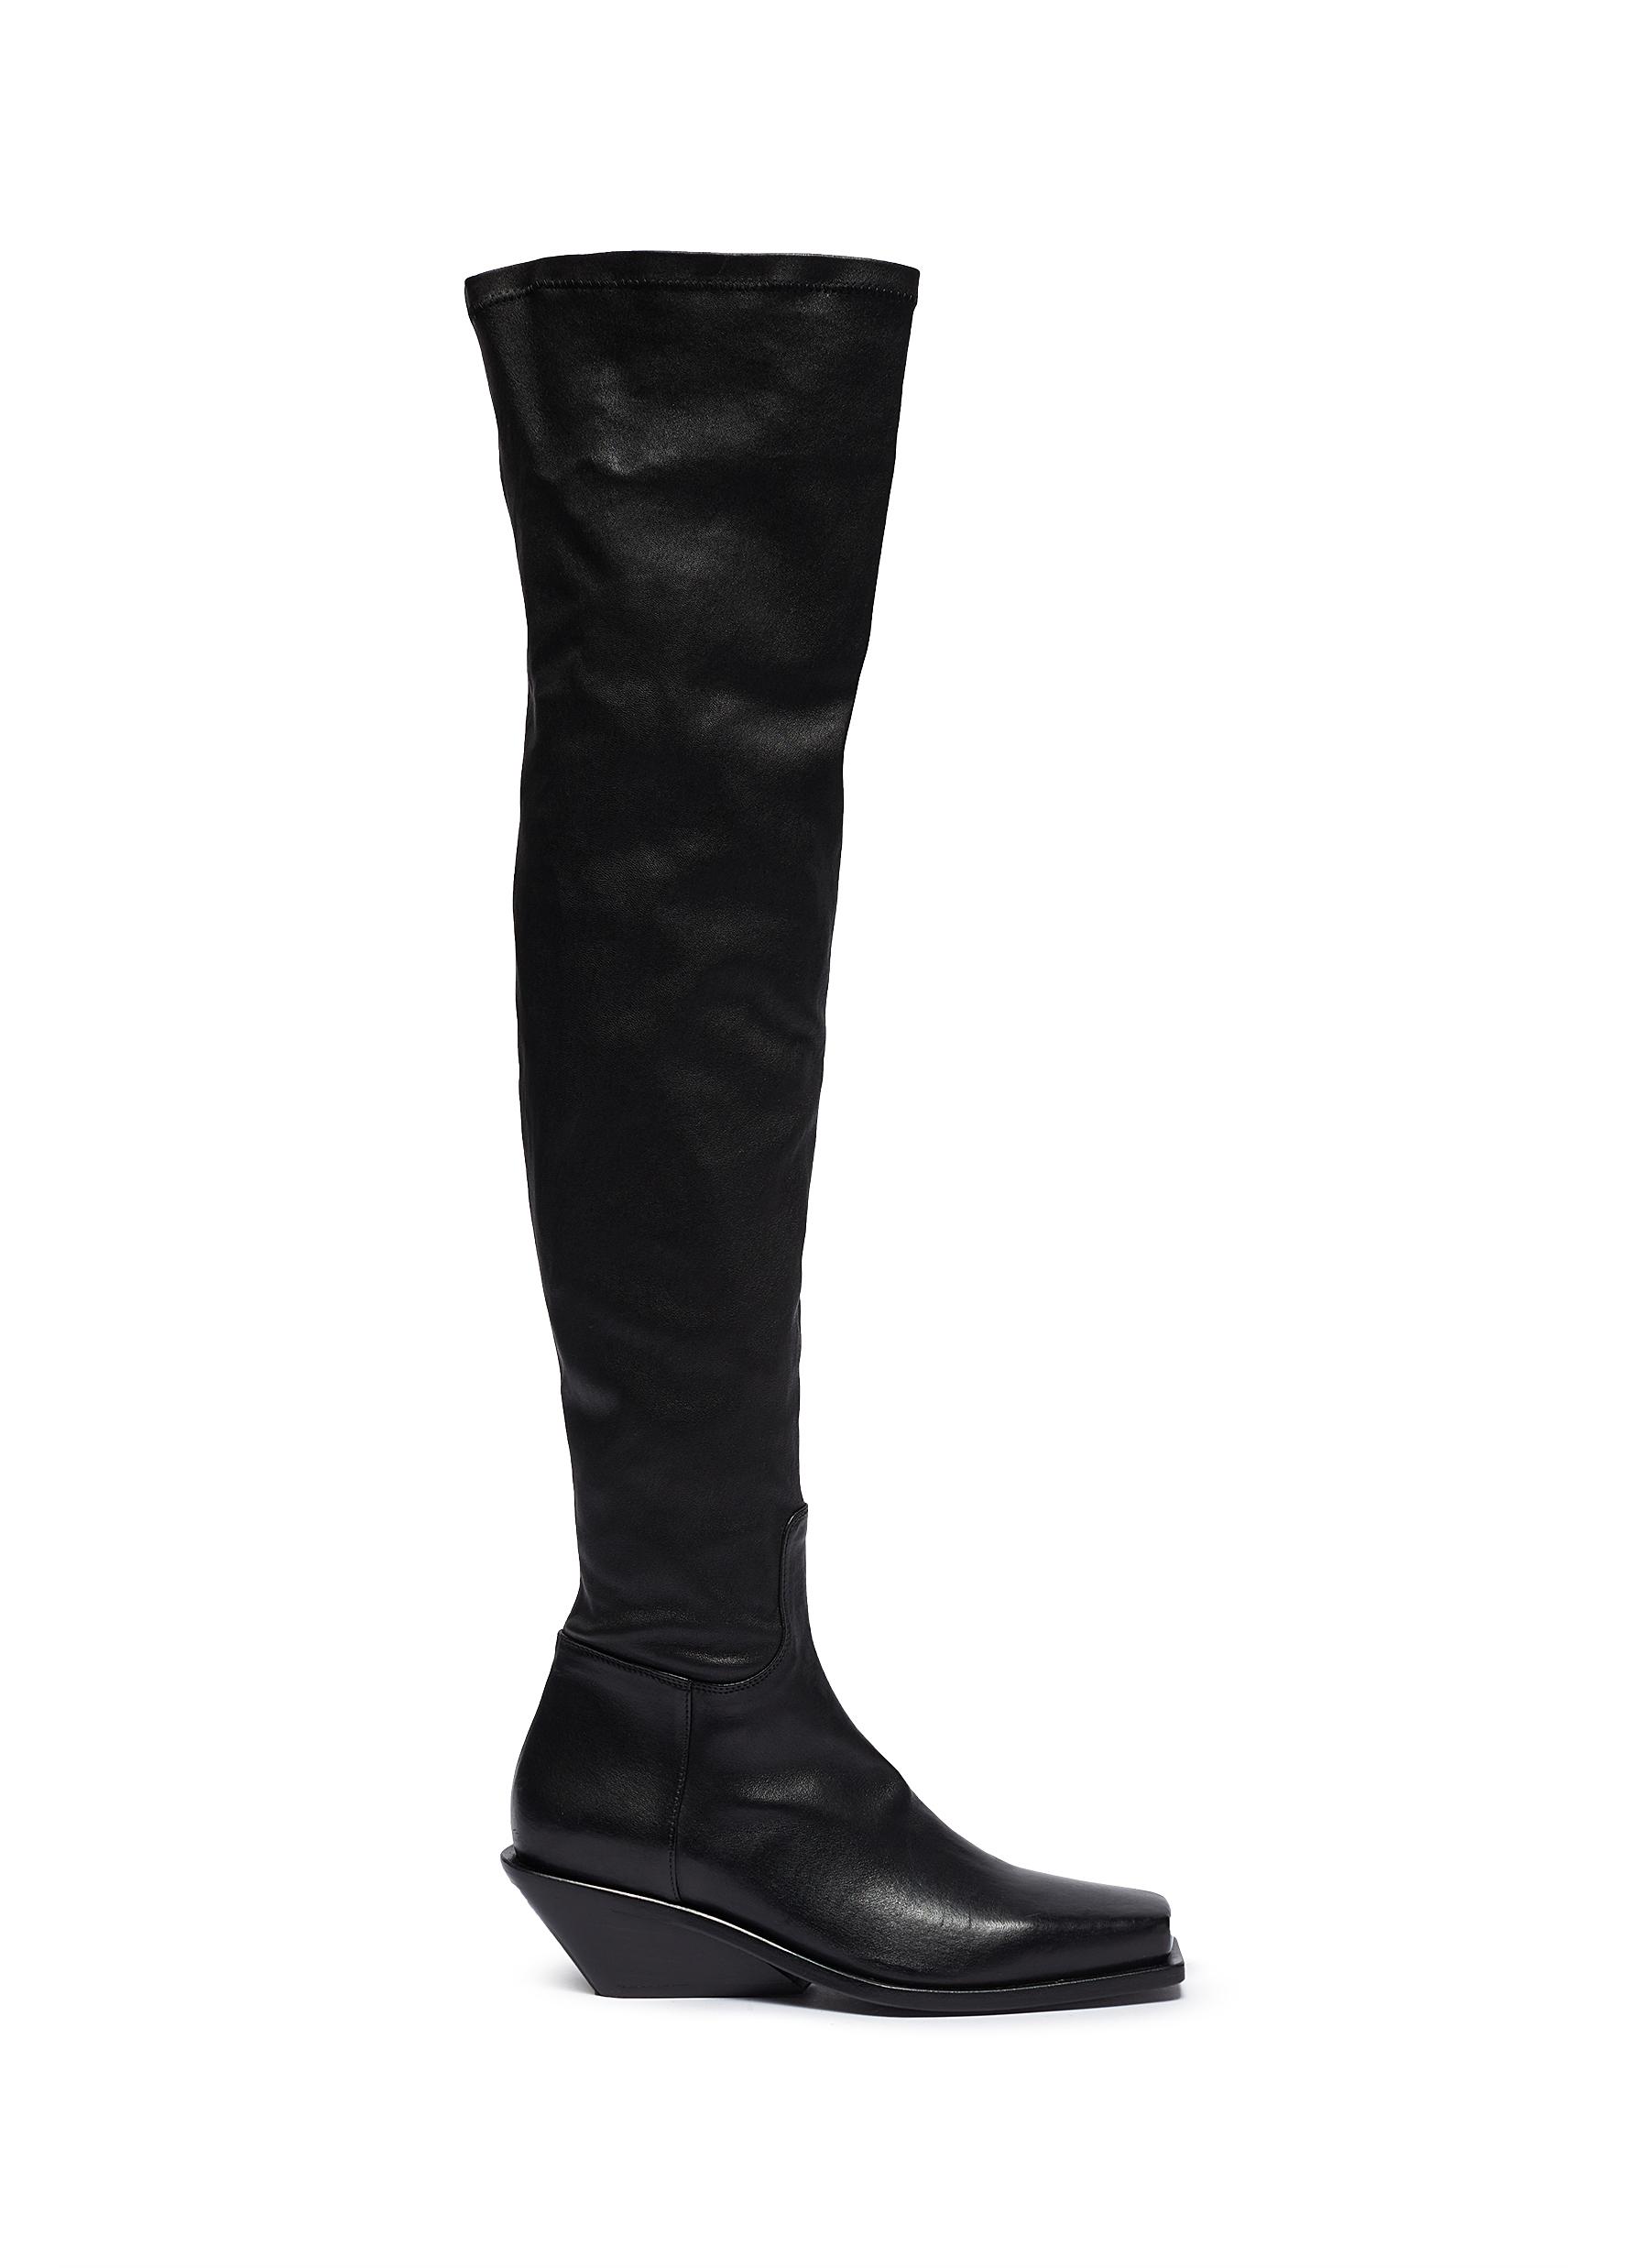 Ann Demeulemeester Boots Square toe platform leather thigh high boots